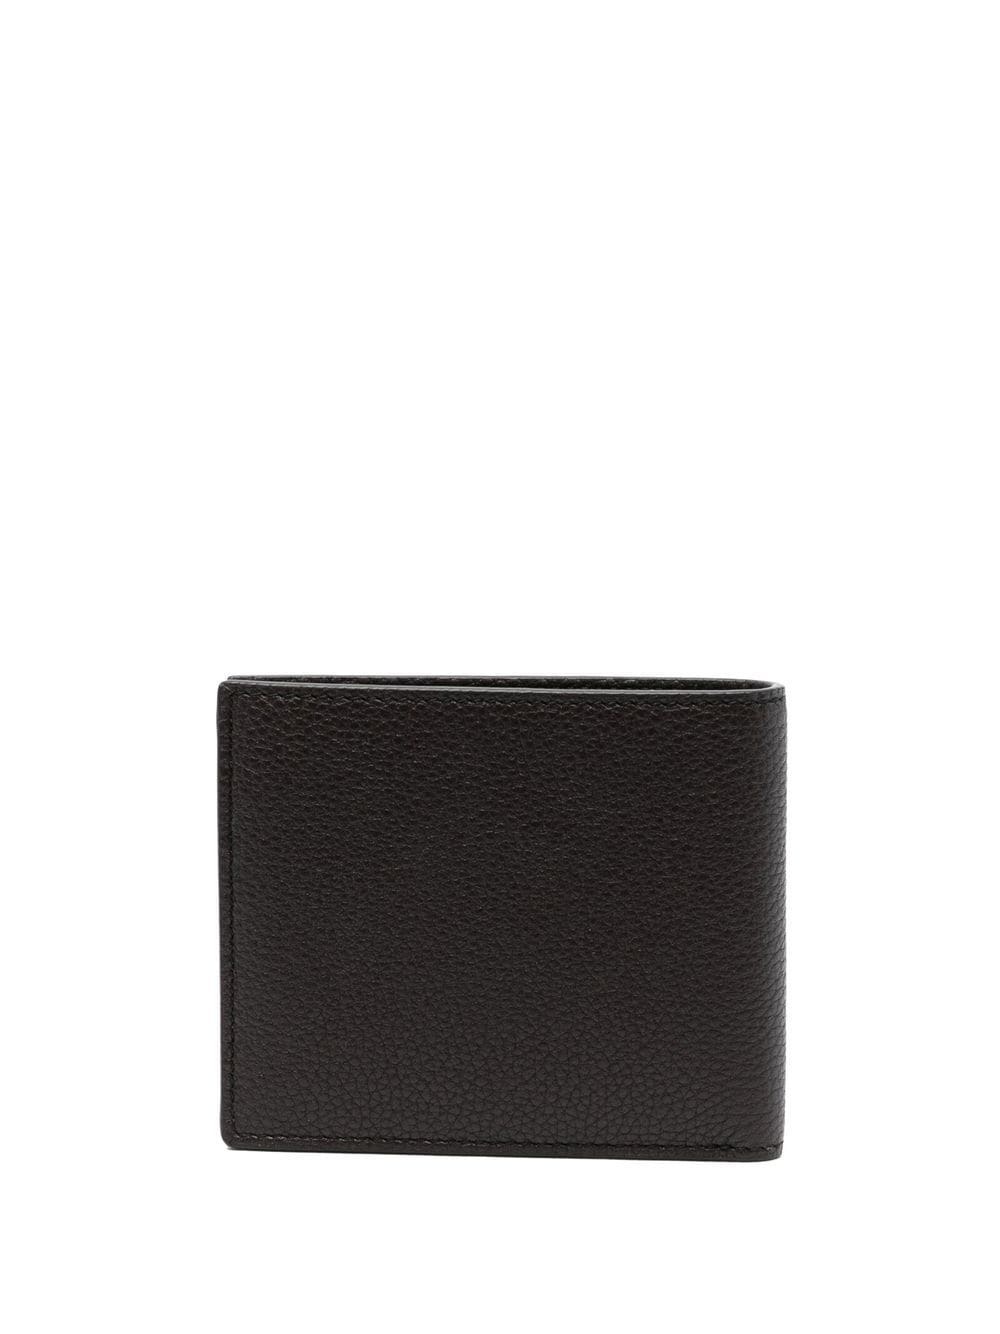 TOM FORD LEATHER WALLET - 5